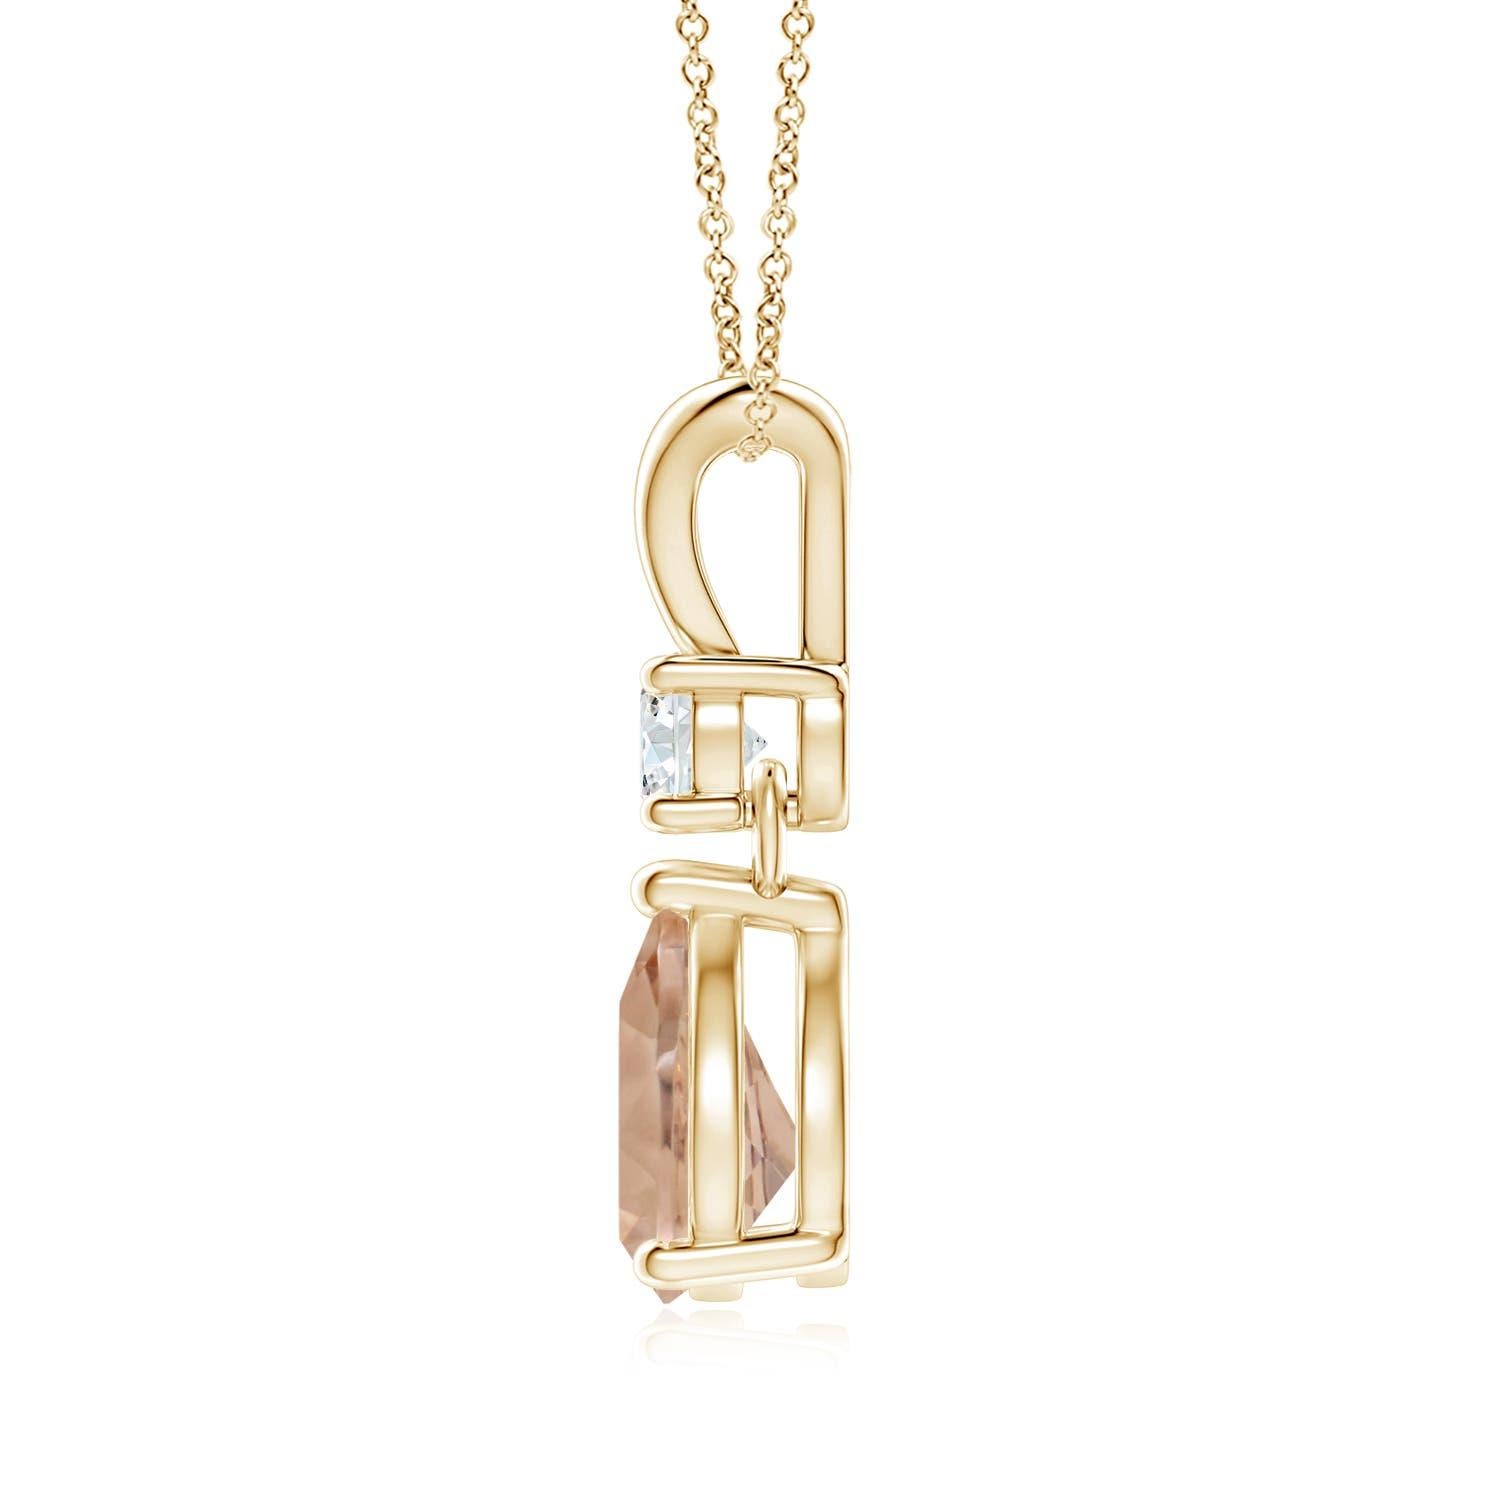 The GIA certified pear-shaped morganite is mounted in a prong setting. It is topped with a sparkling diamond and linked to a stylish V-bale. This 14k yellow gold pendant has an unmissable feminine flair.
